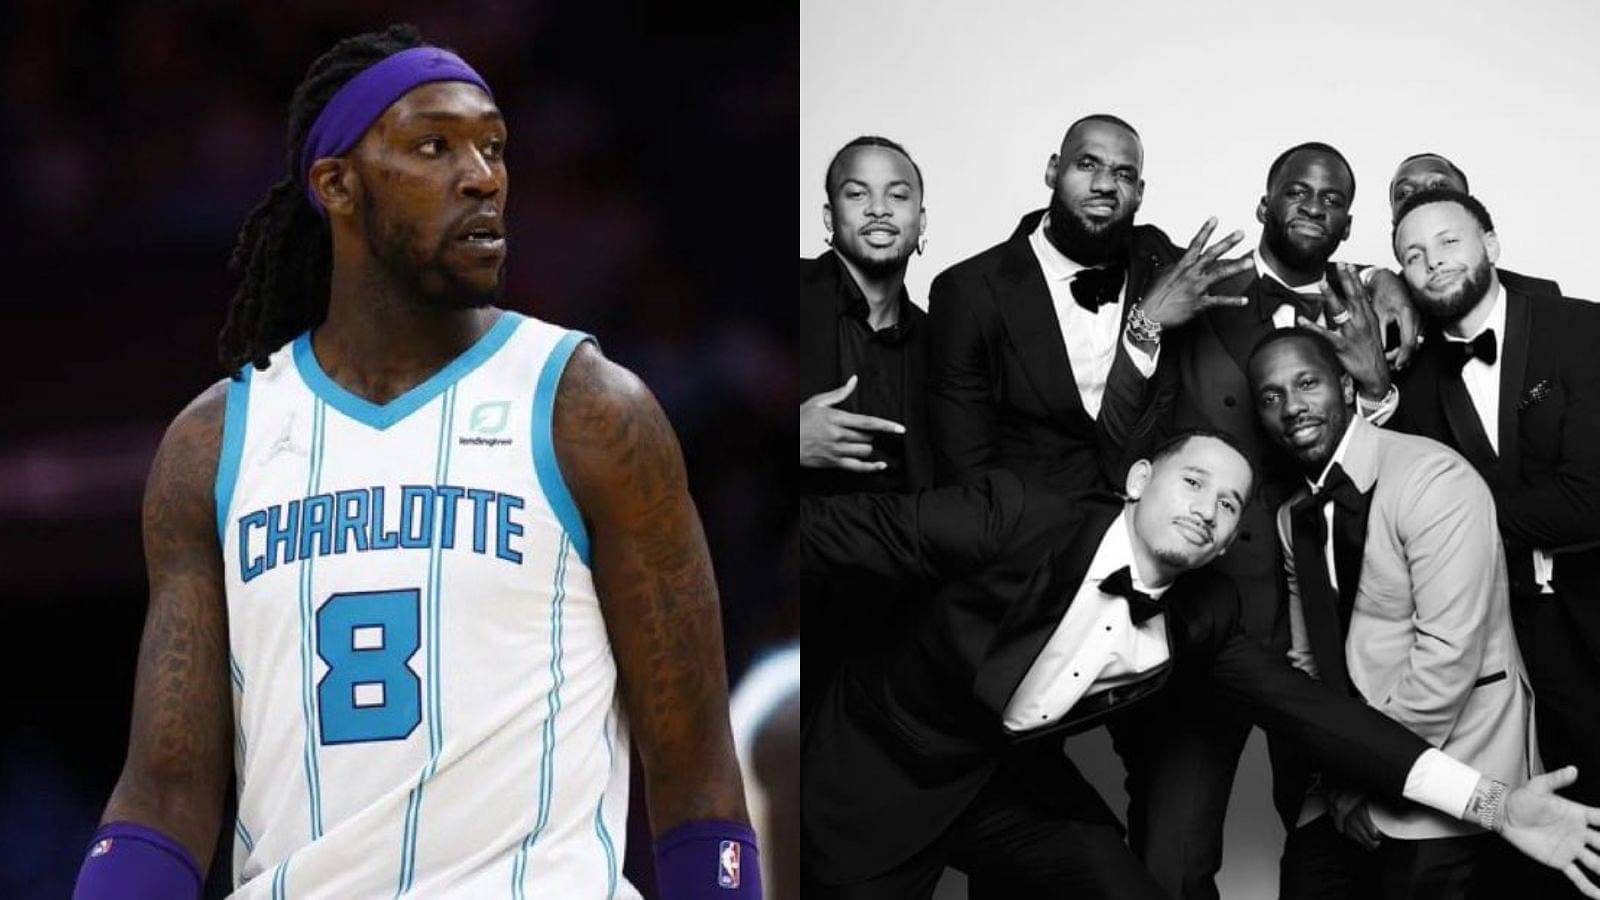 “While Montrezl Harrell faces felony charges for marijuana, Draymond Green is passing it out at his wedding”: NBA Reddit calls out hypocrisy regarding marijuana legalization in the U.S.